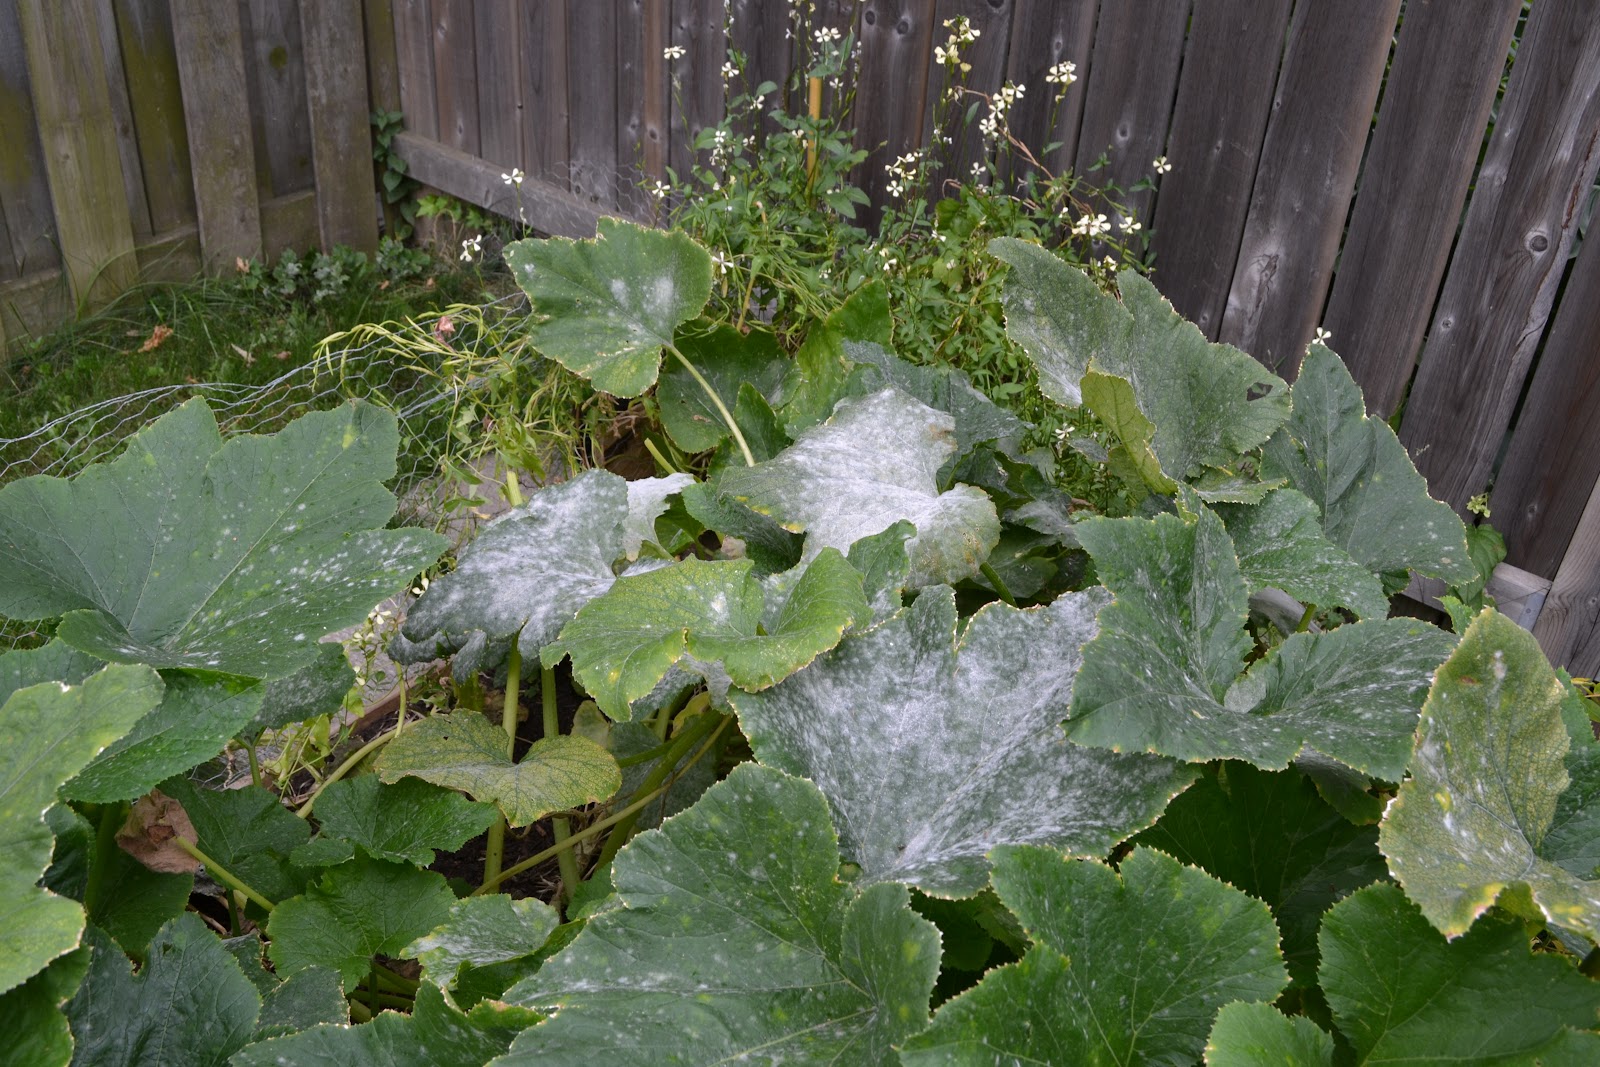 Large zucchini plant heavily infested by powdery mildew.